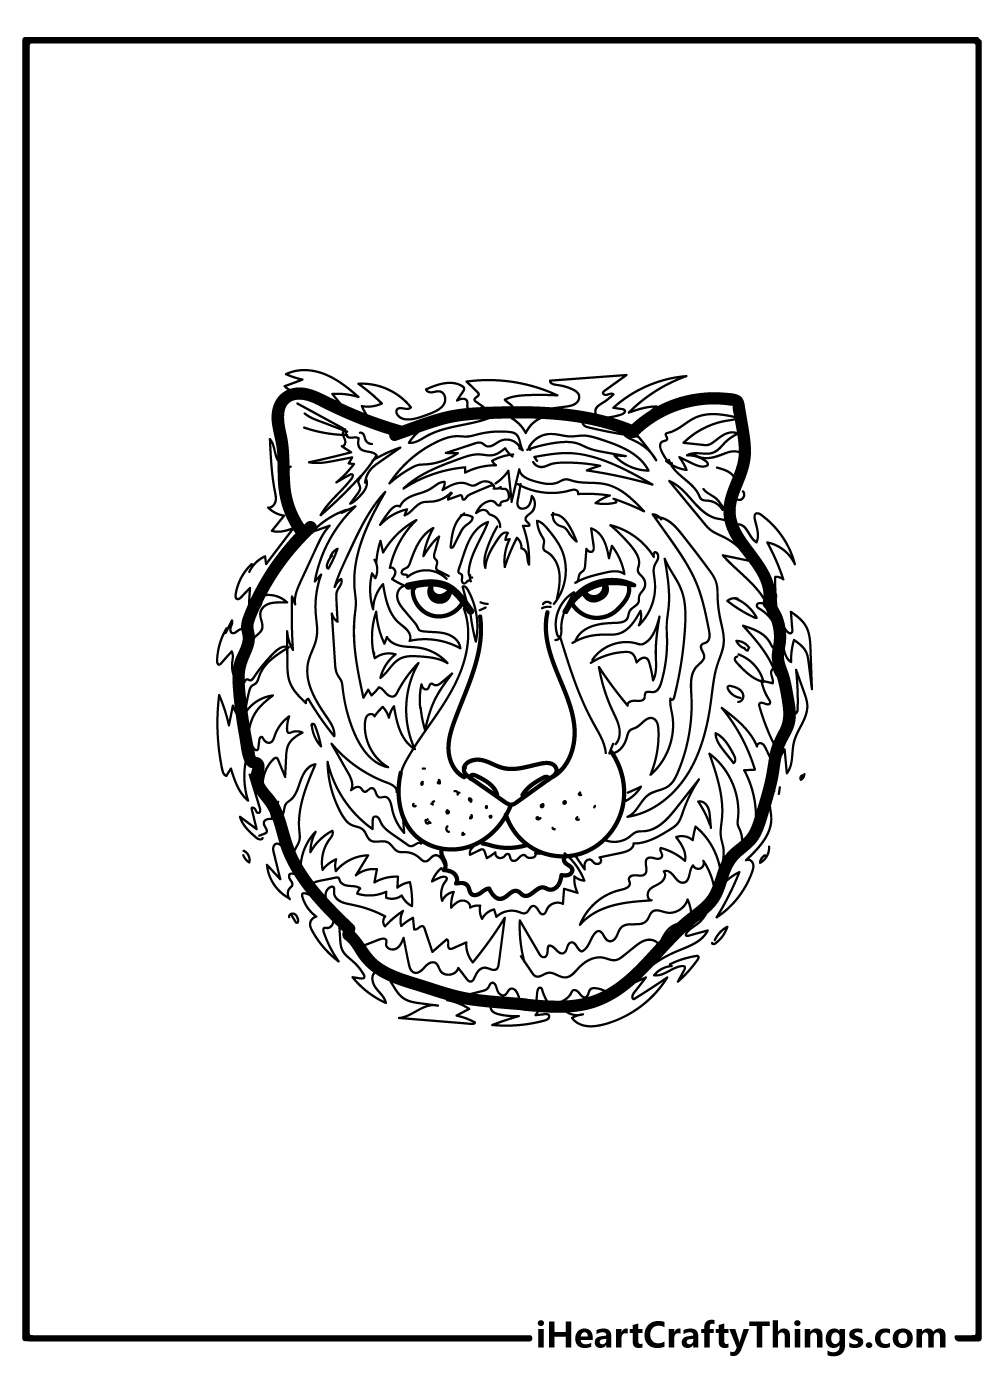 Tiger Coloring Pages for kids free download